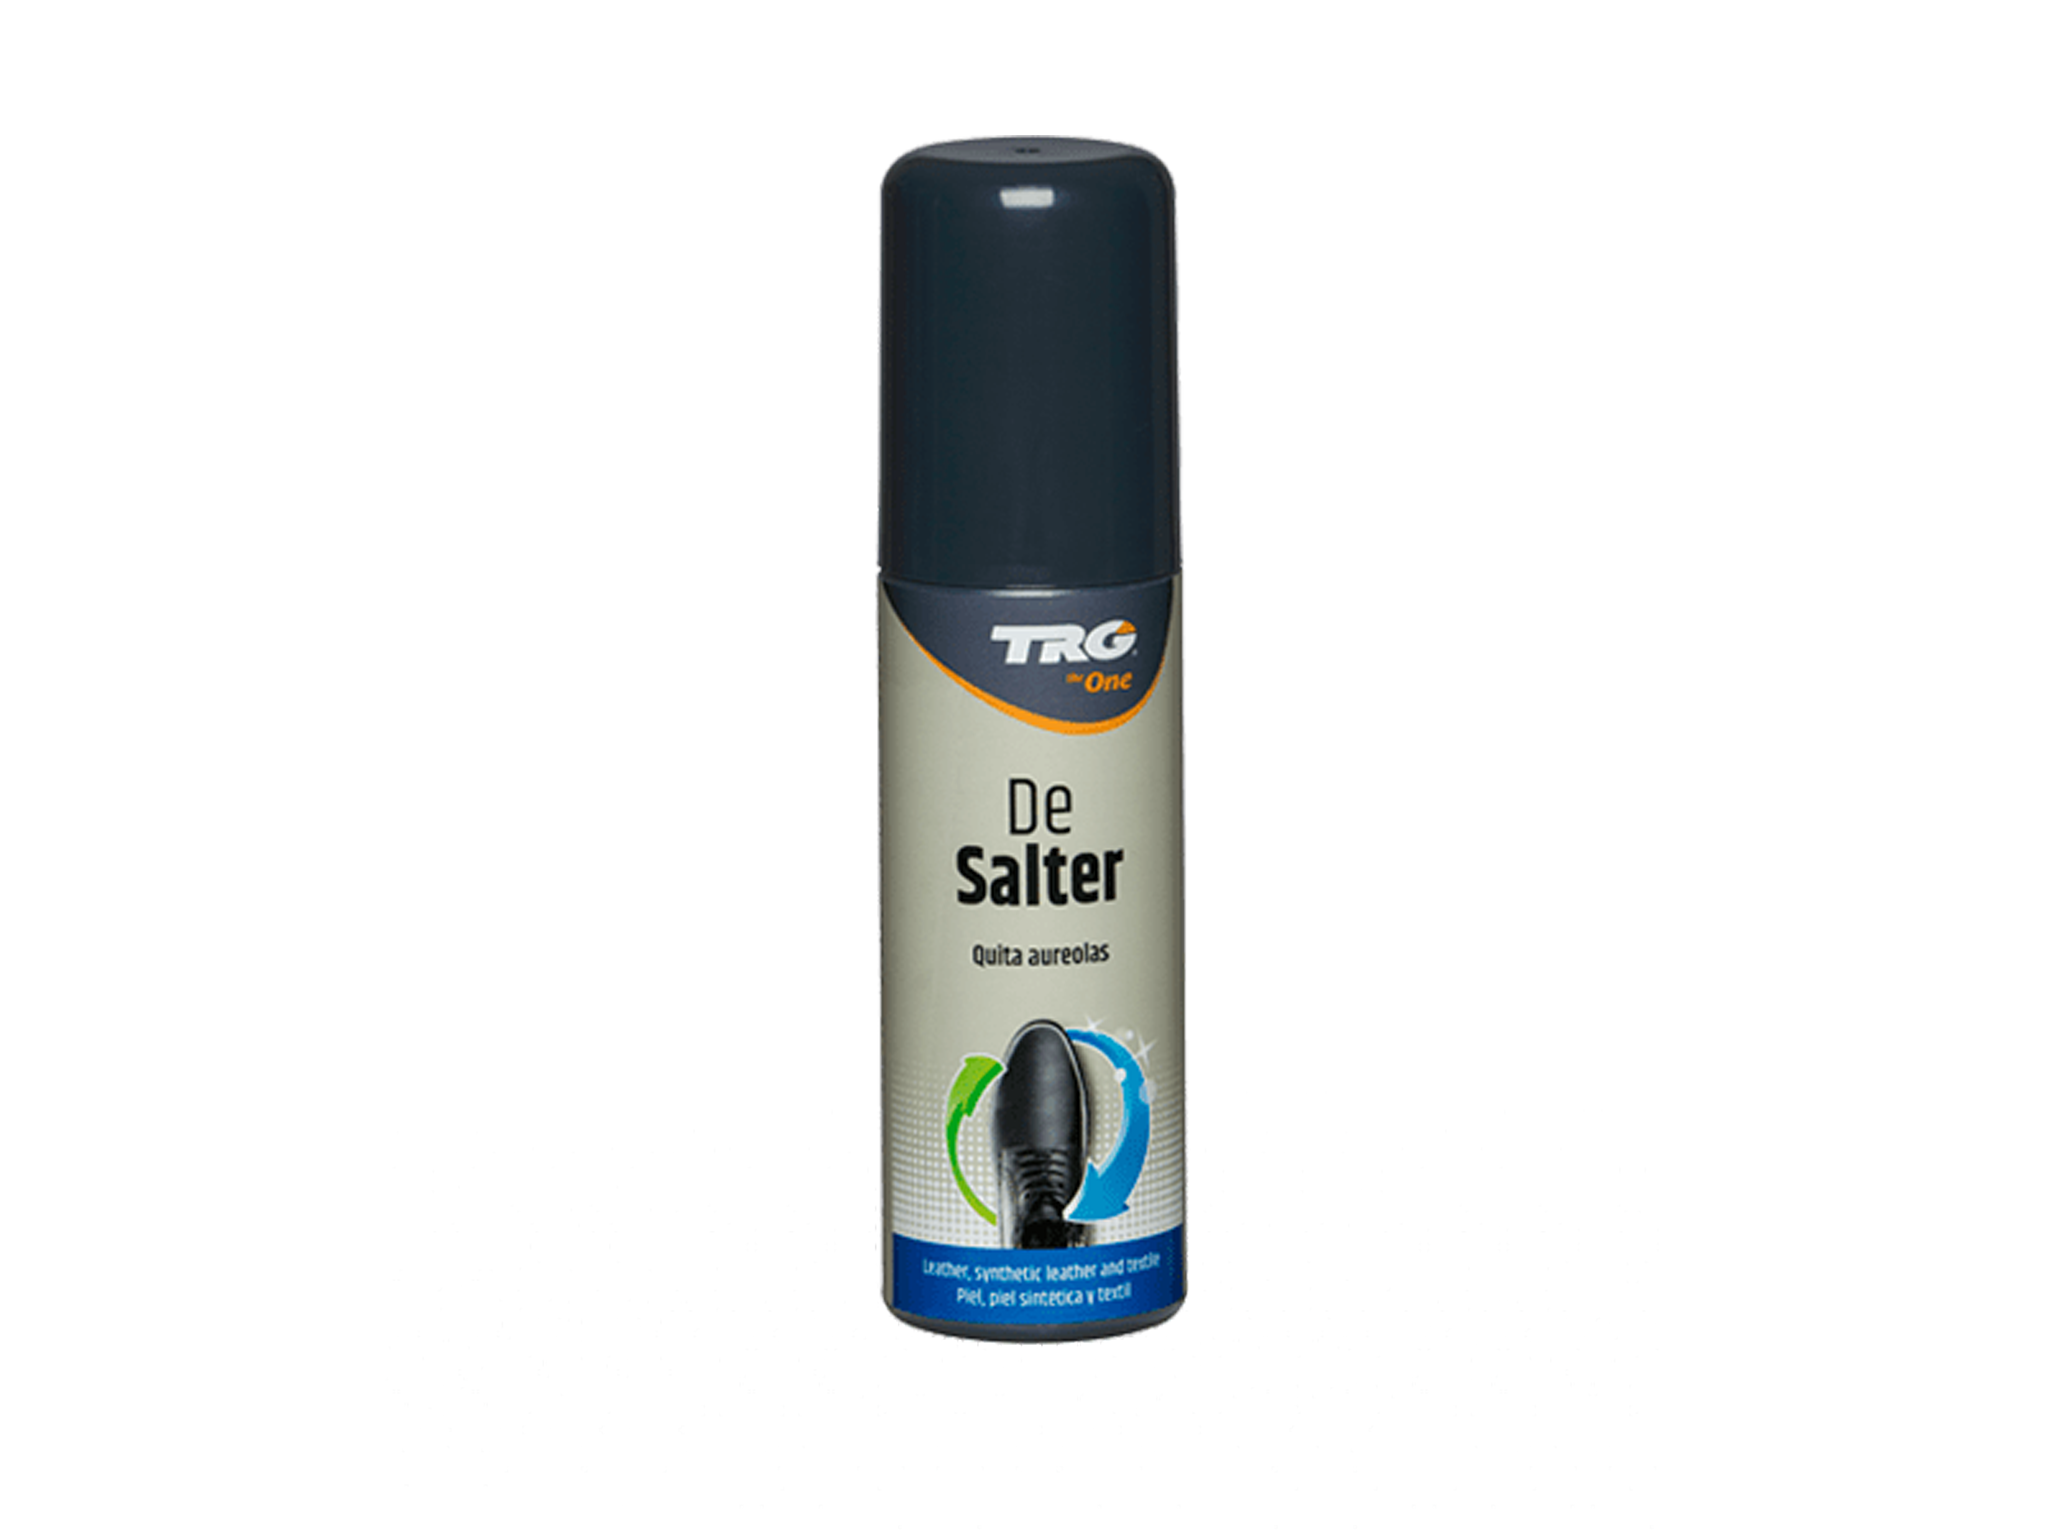 TRG de salter / stain remover